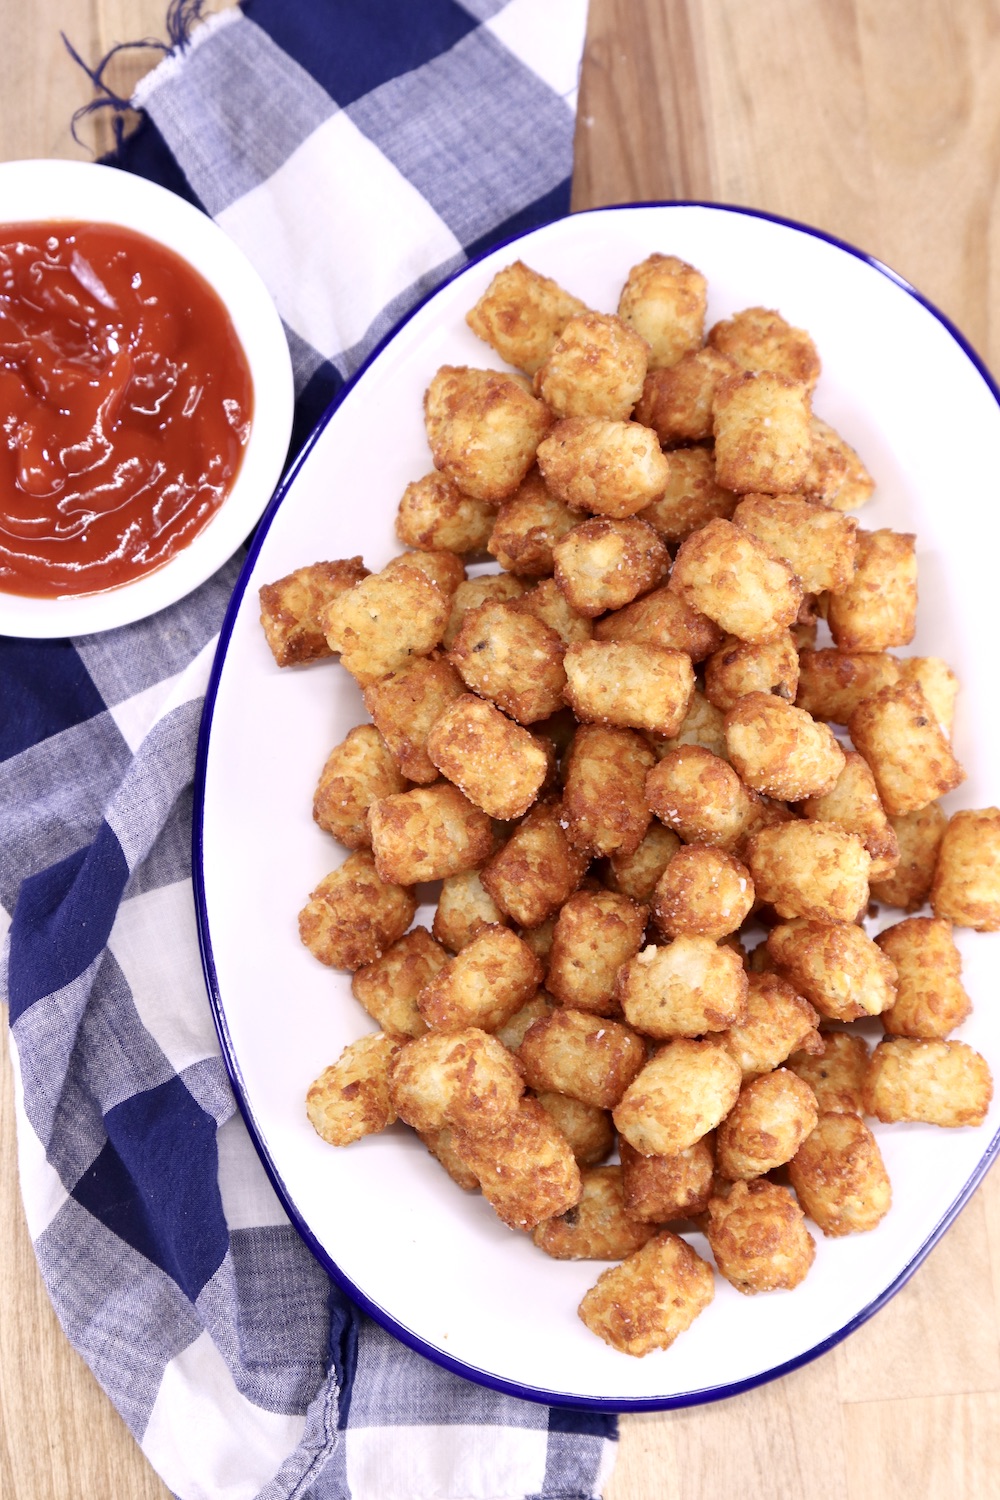 oval platter of tater tots with small bowl of ketchup